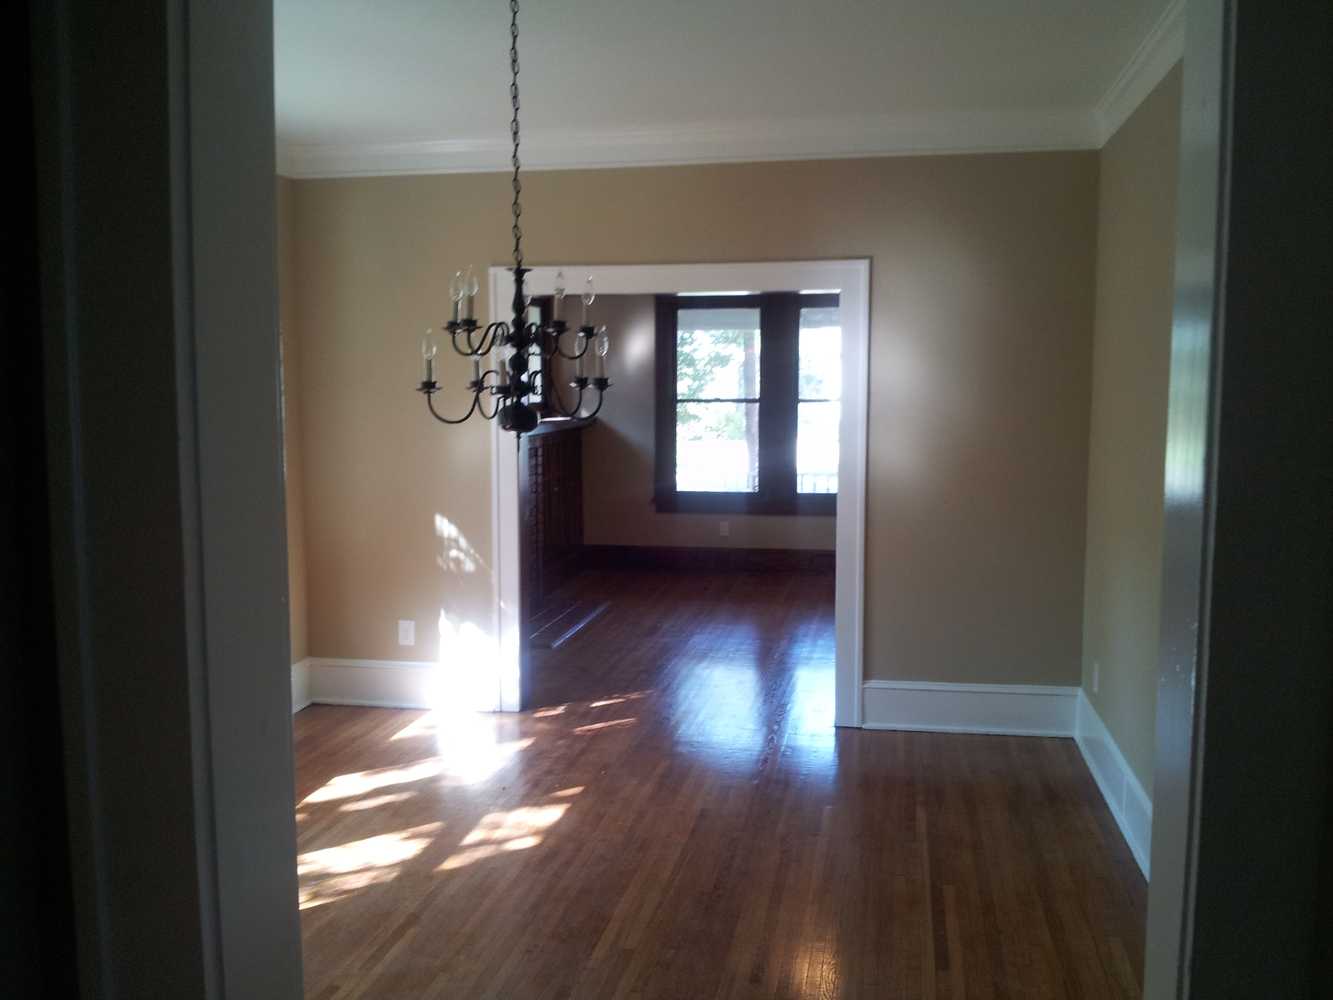 Photos from Superior Paint & Remodeling